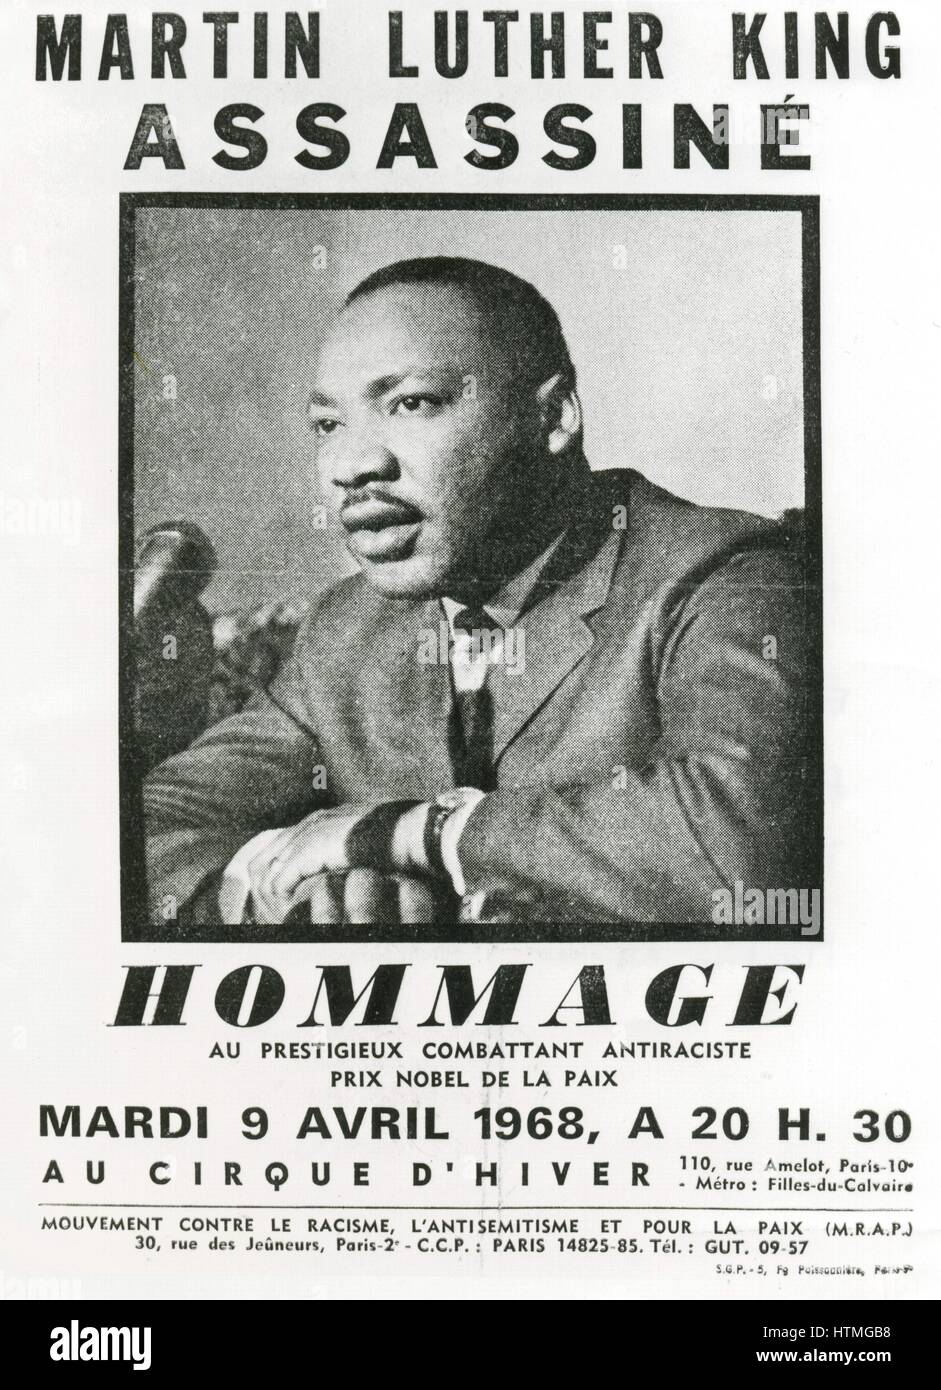 Dr Martin Luther King Jr 1929-1968 BW Poster 